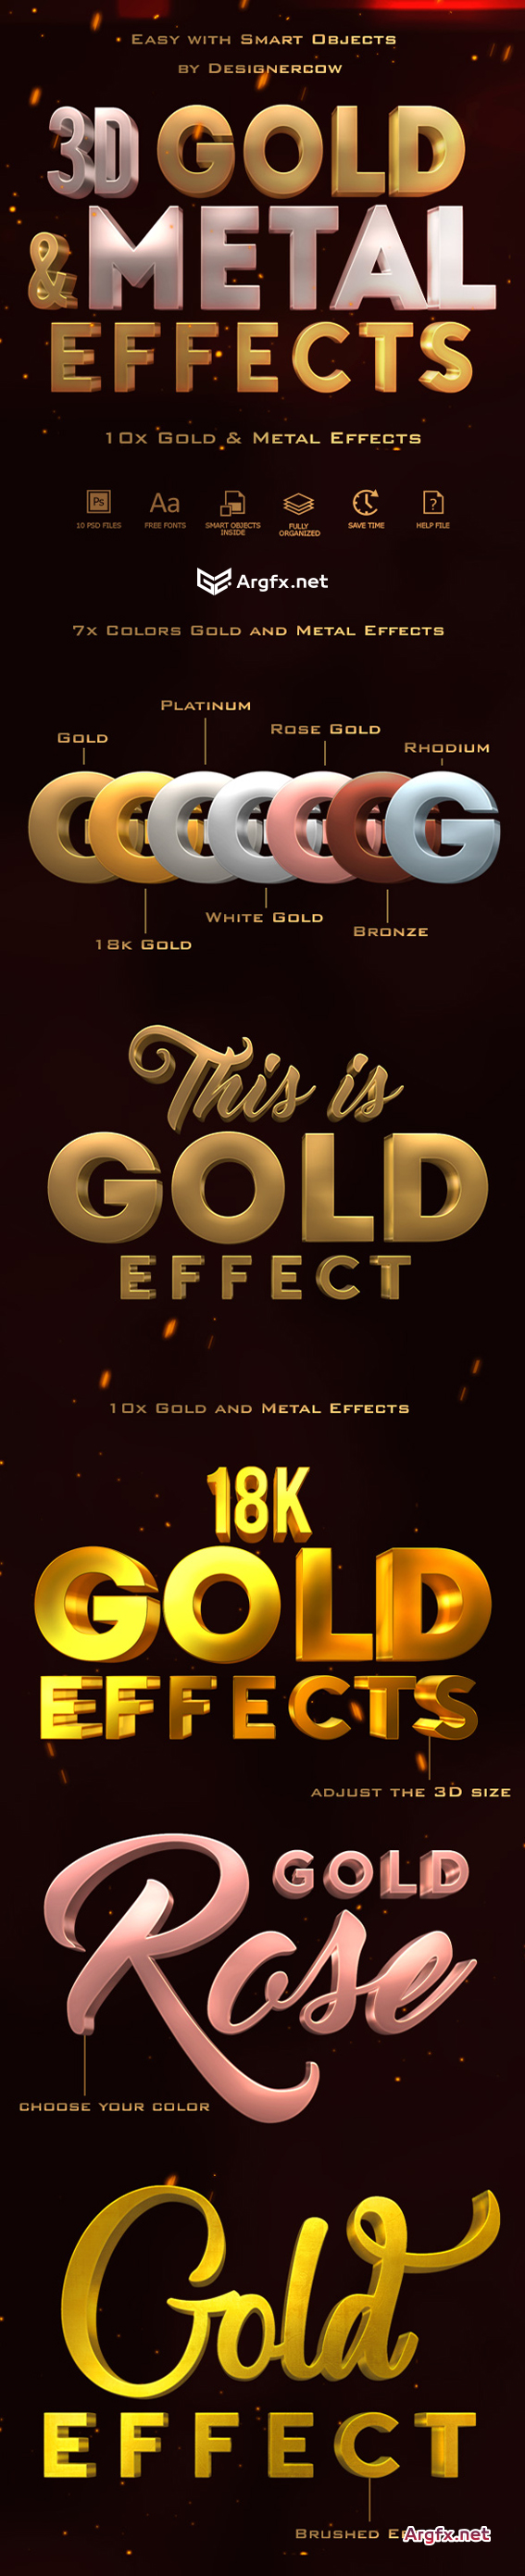 Graphicriver 3D Gold and Metal Effects 19406450